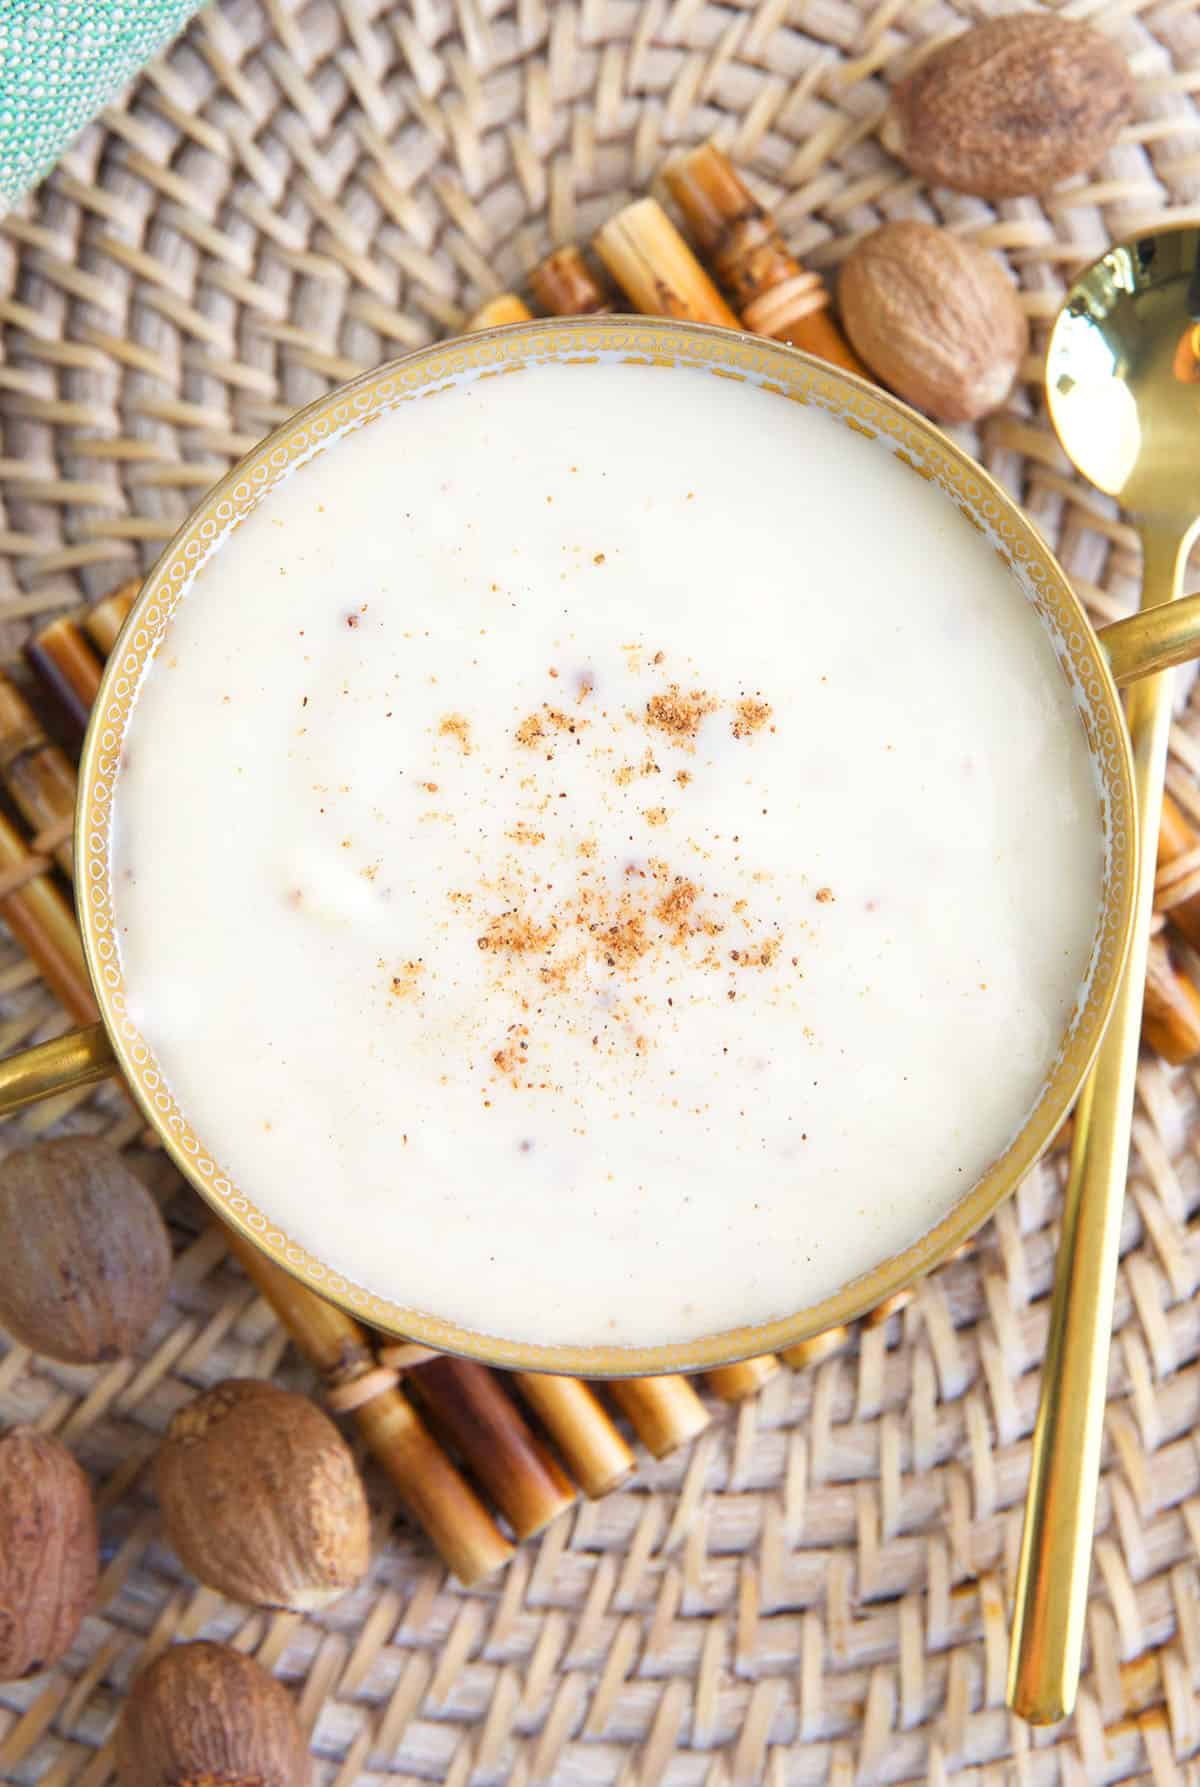 A bowl of bechamel sauce is dusted with nutmeg.